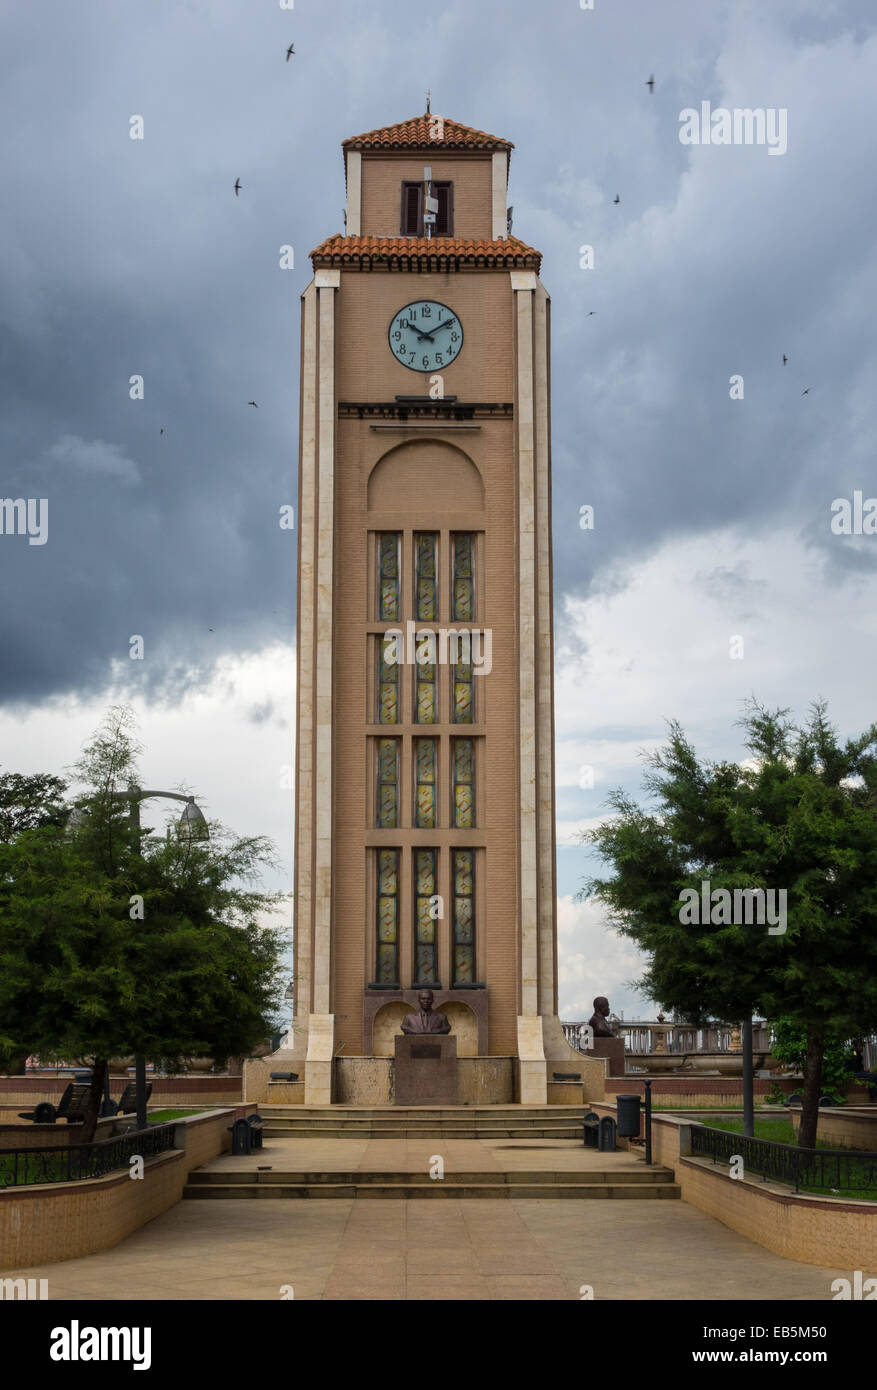 Clock tower and statues of the President and Head of State in his home town of Mongomo, Equatorial Guinea in Africa Stock Photo